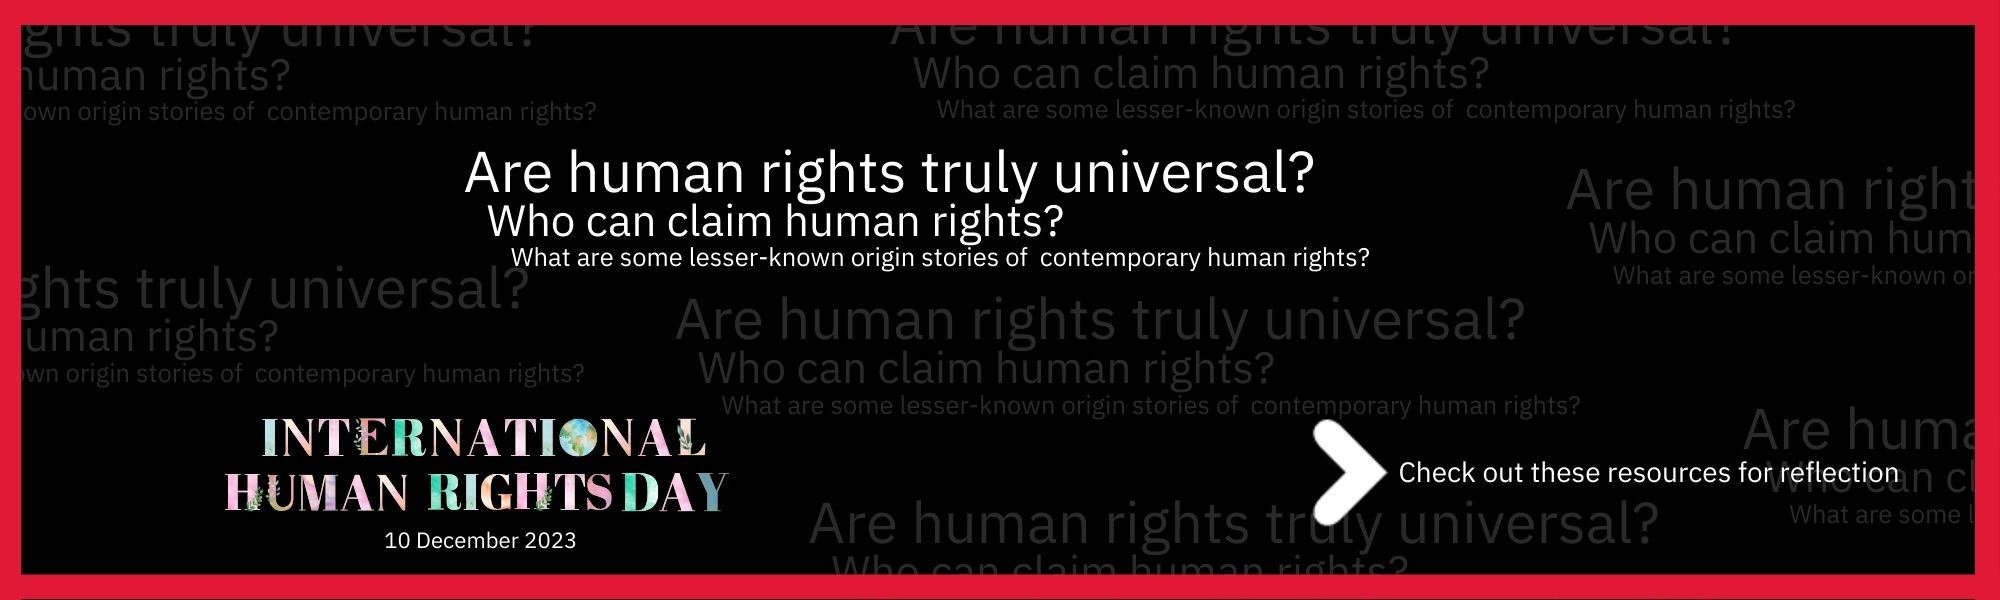 Are human rights truly universal? Who can claim human rights?
What are some lesser known origin stories of contemporary human rights?